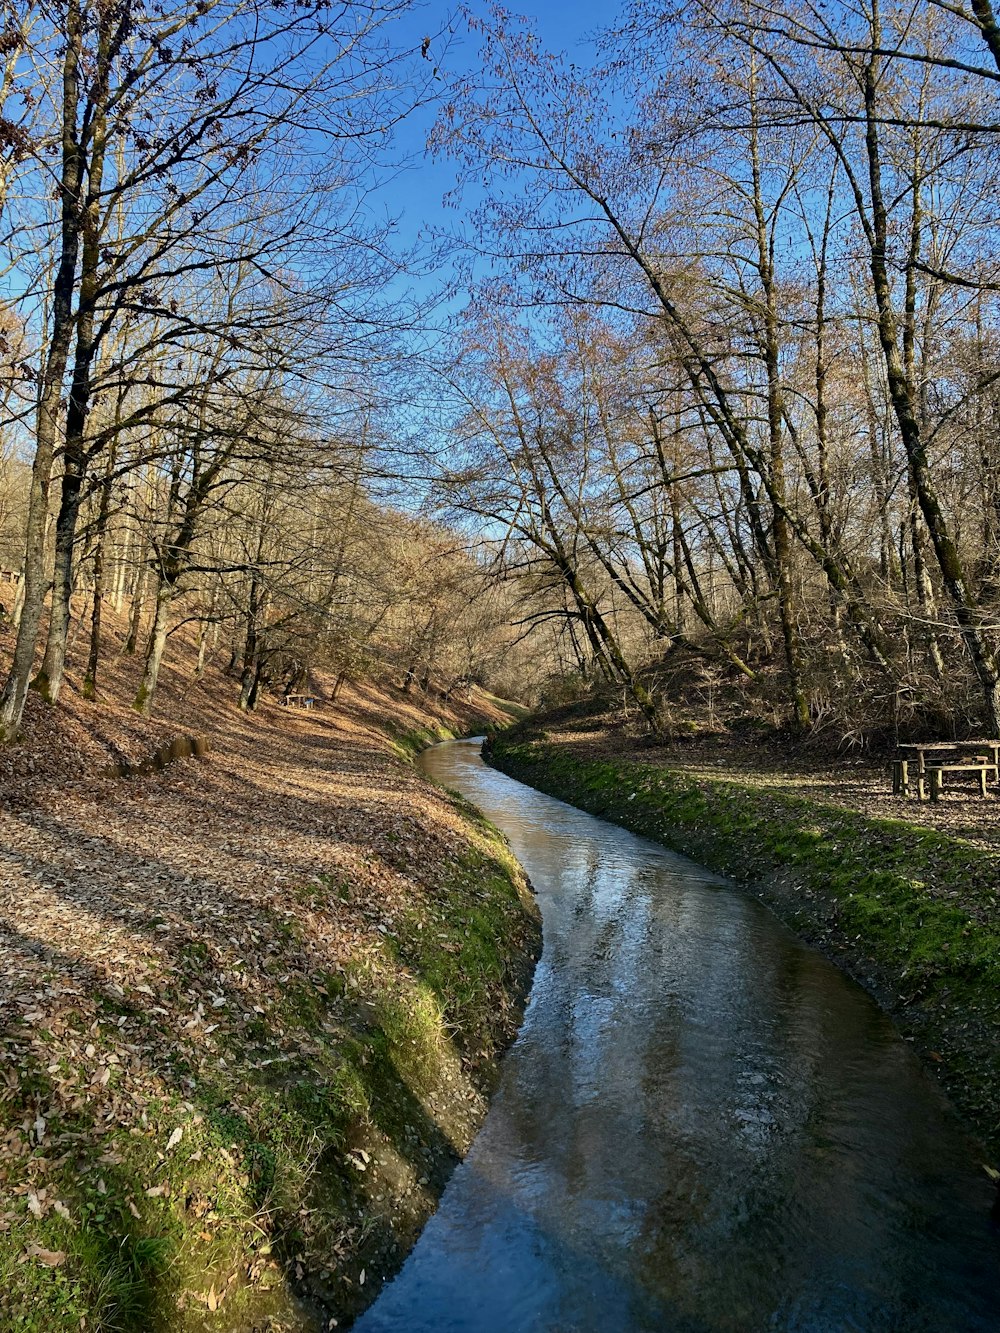 a small stream running through a forest filled with trees